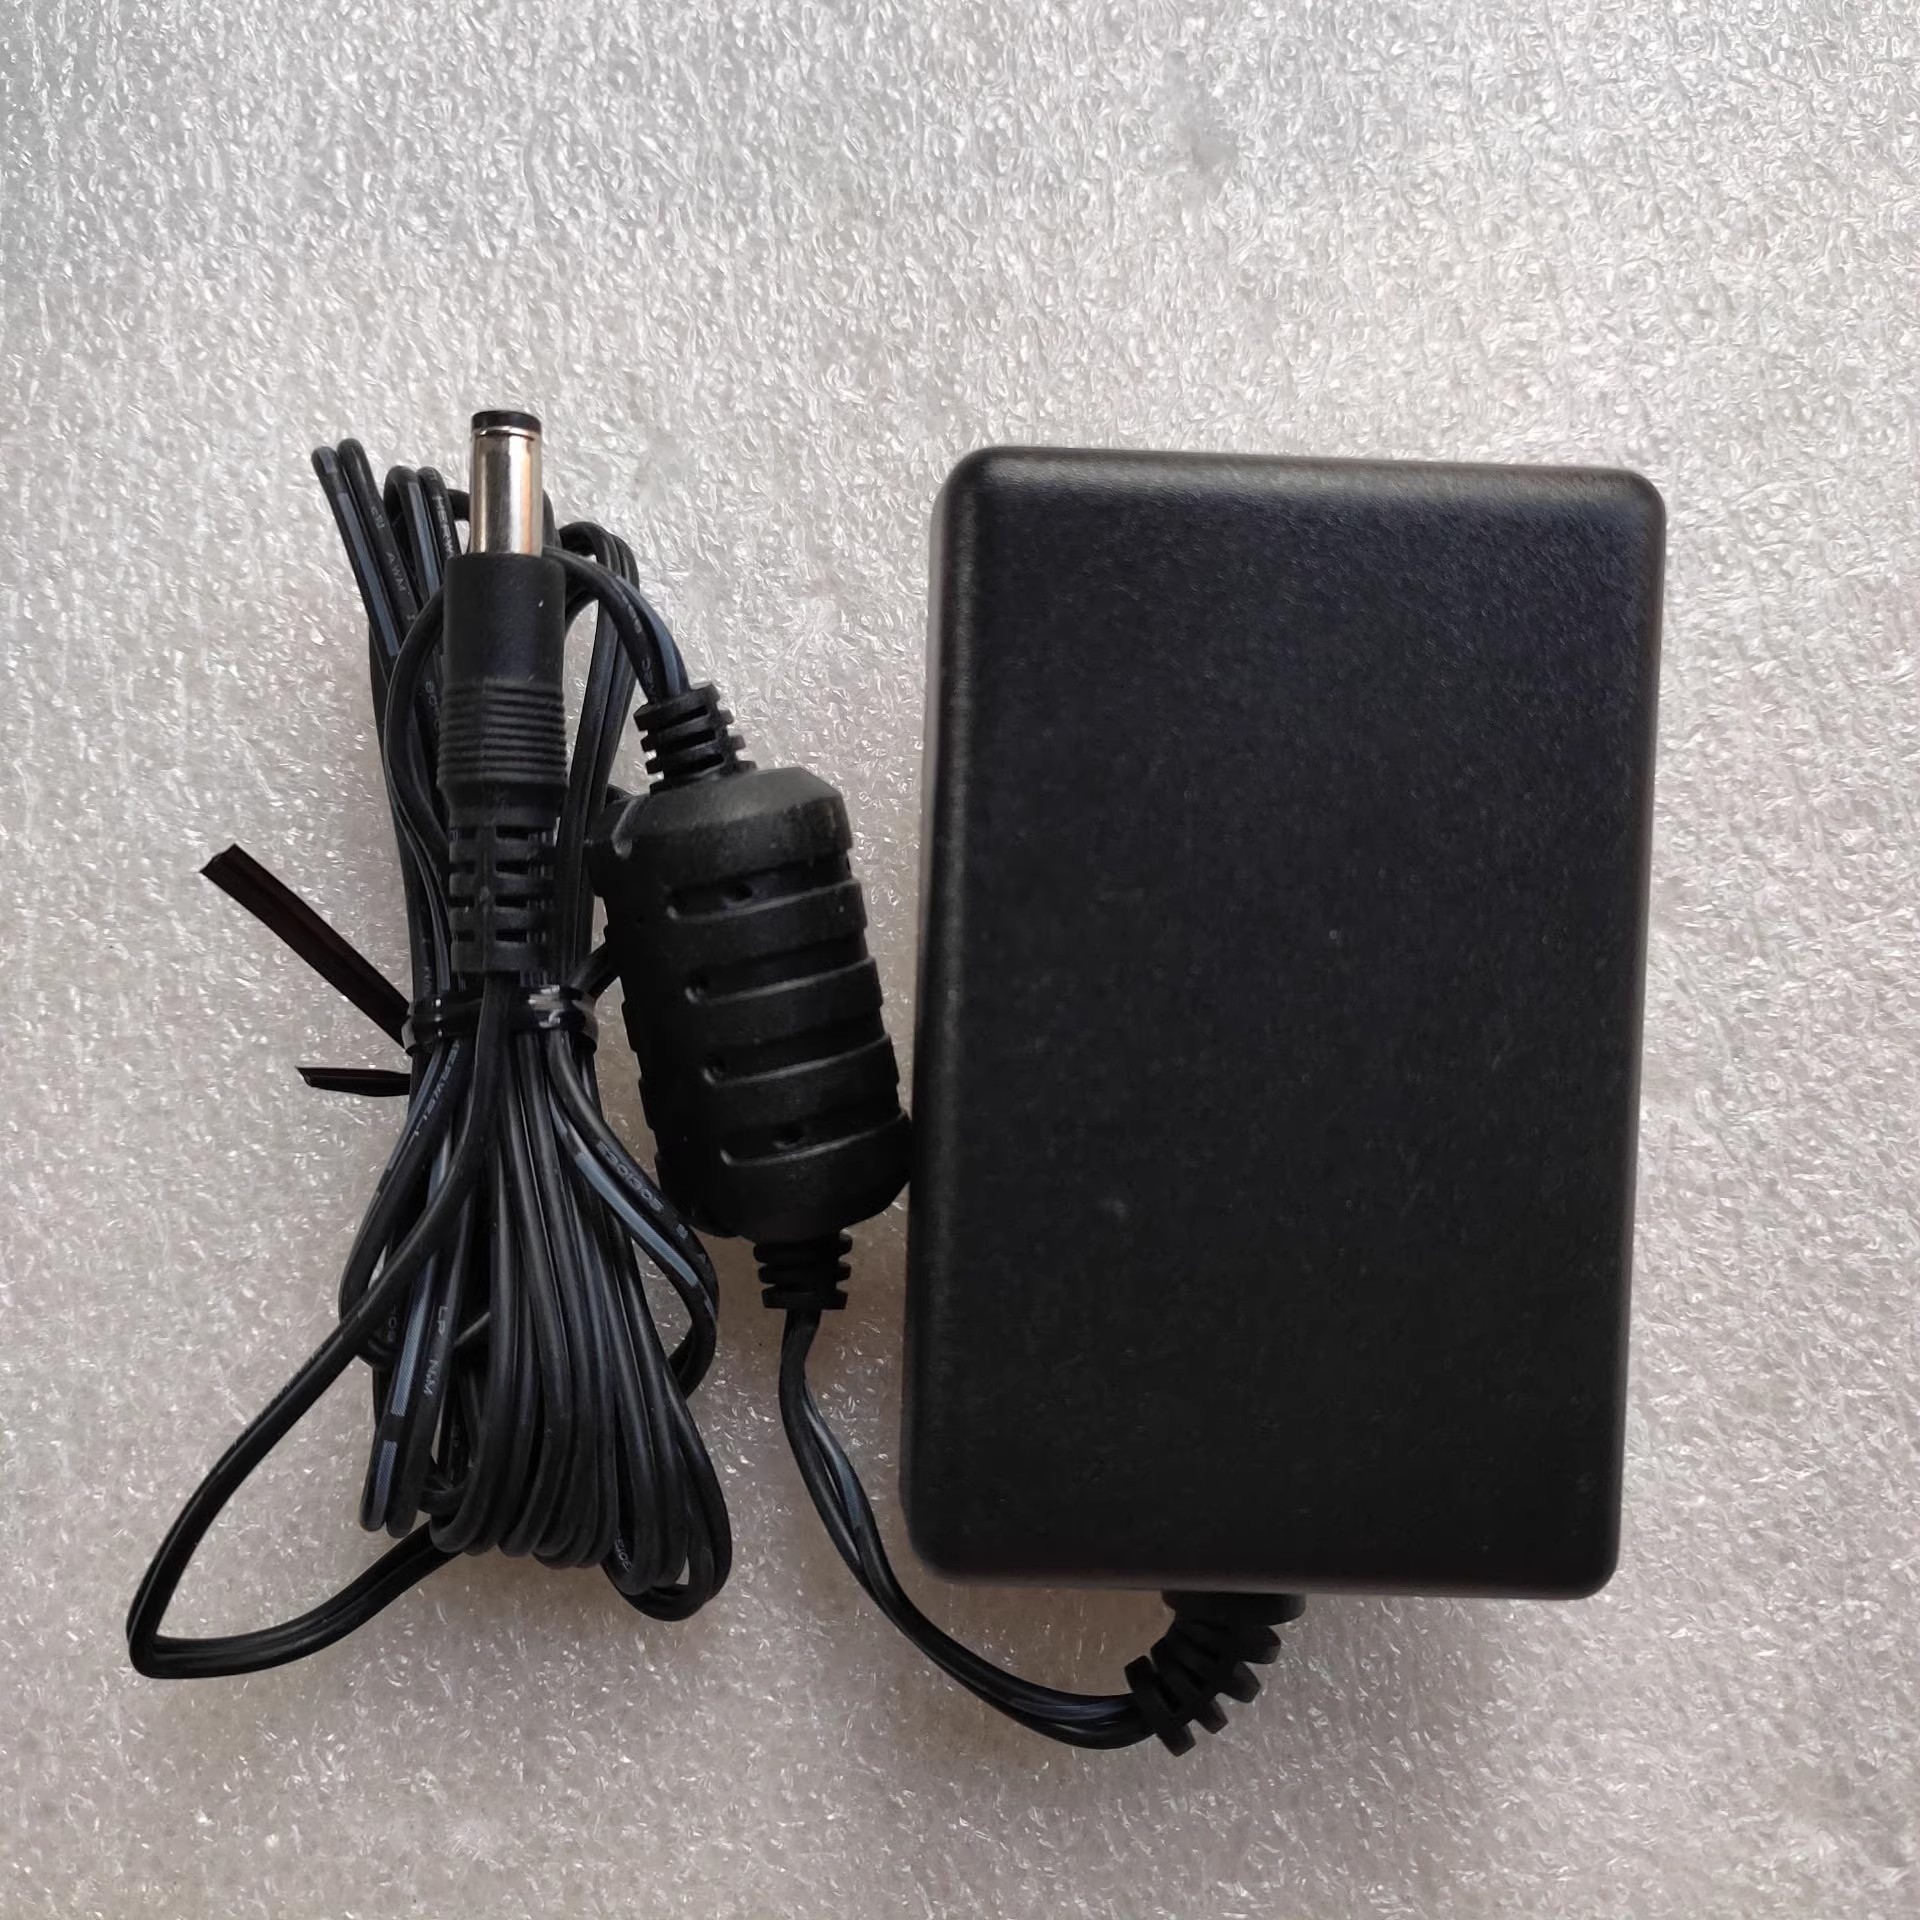 *Brand NEW*SOUND FREAQ 18V 3300MA AC DC ADAPTHE AS600-180-AA330 POWER Supply